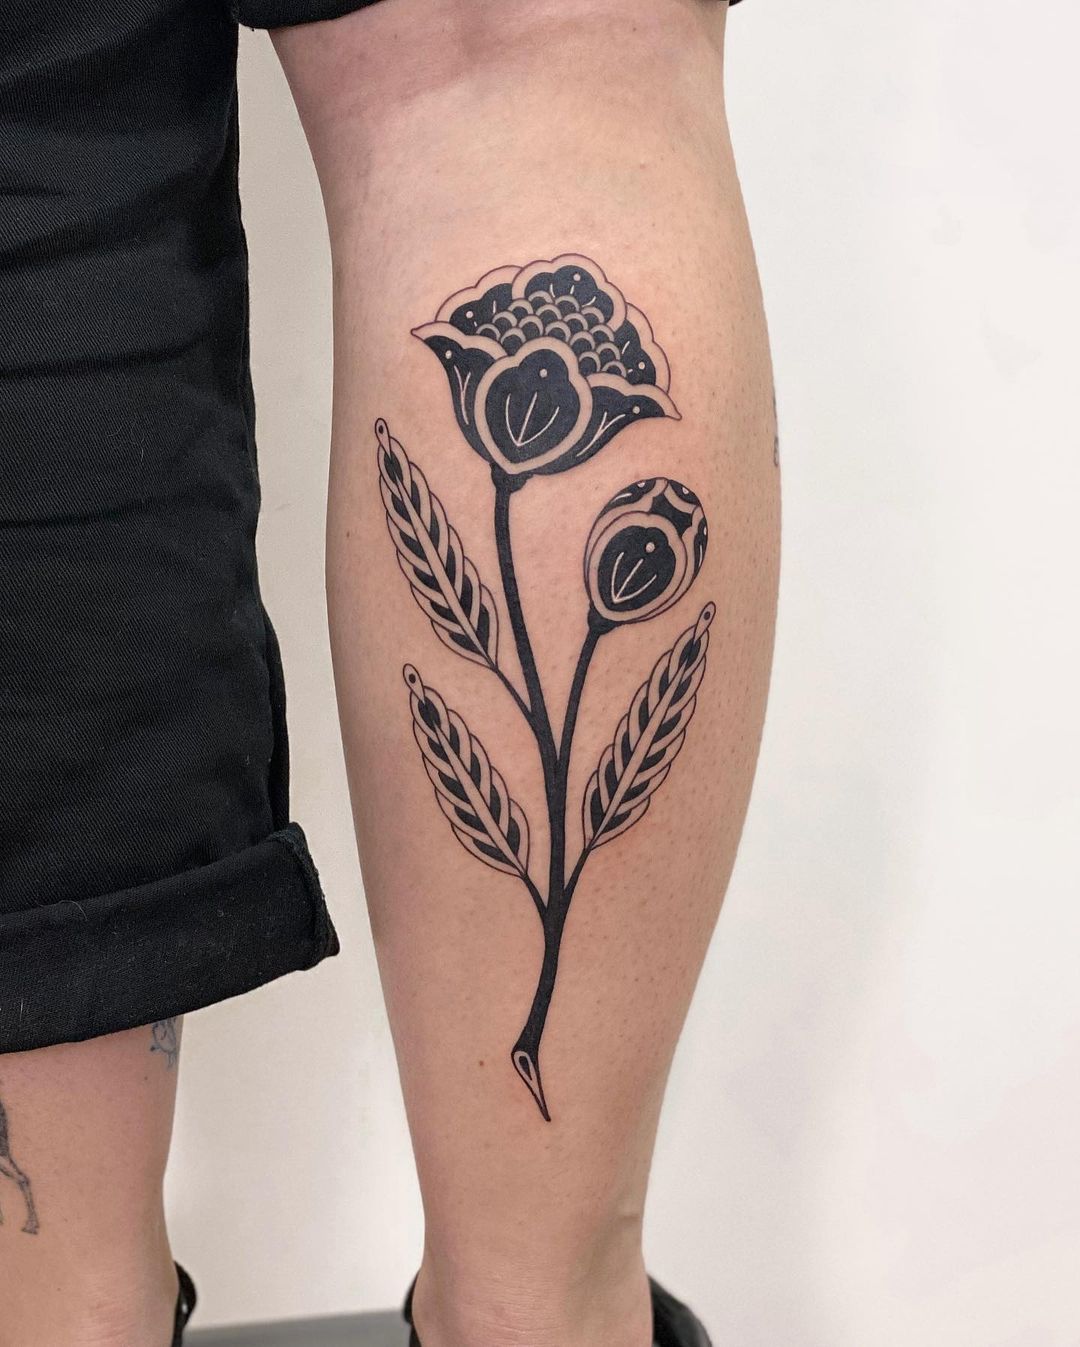 0Black and White Traditional Flower Tattoo on Arm